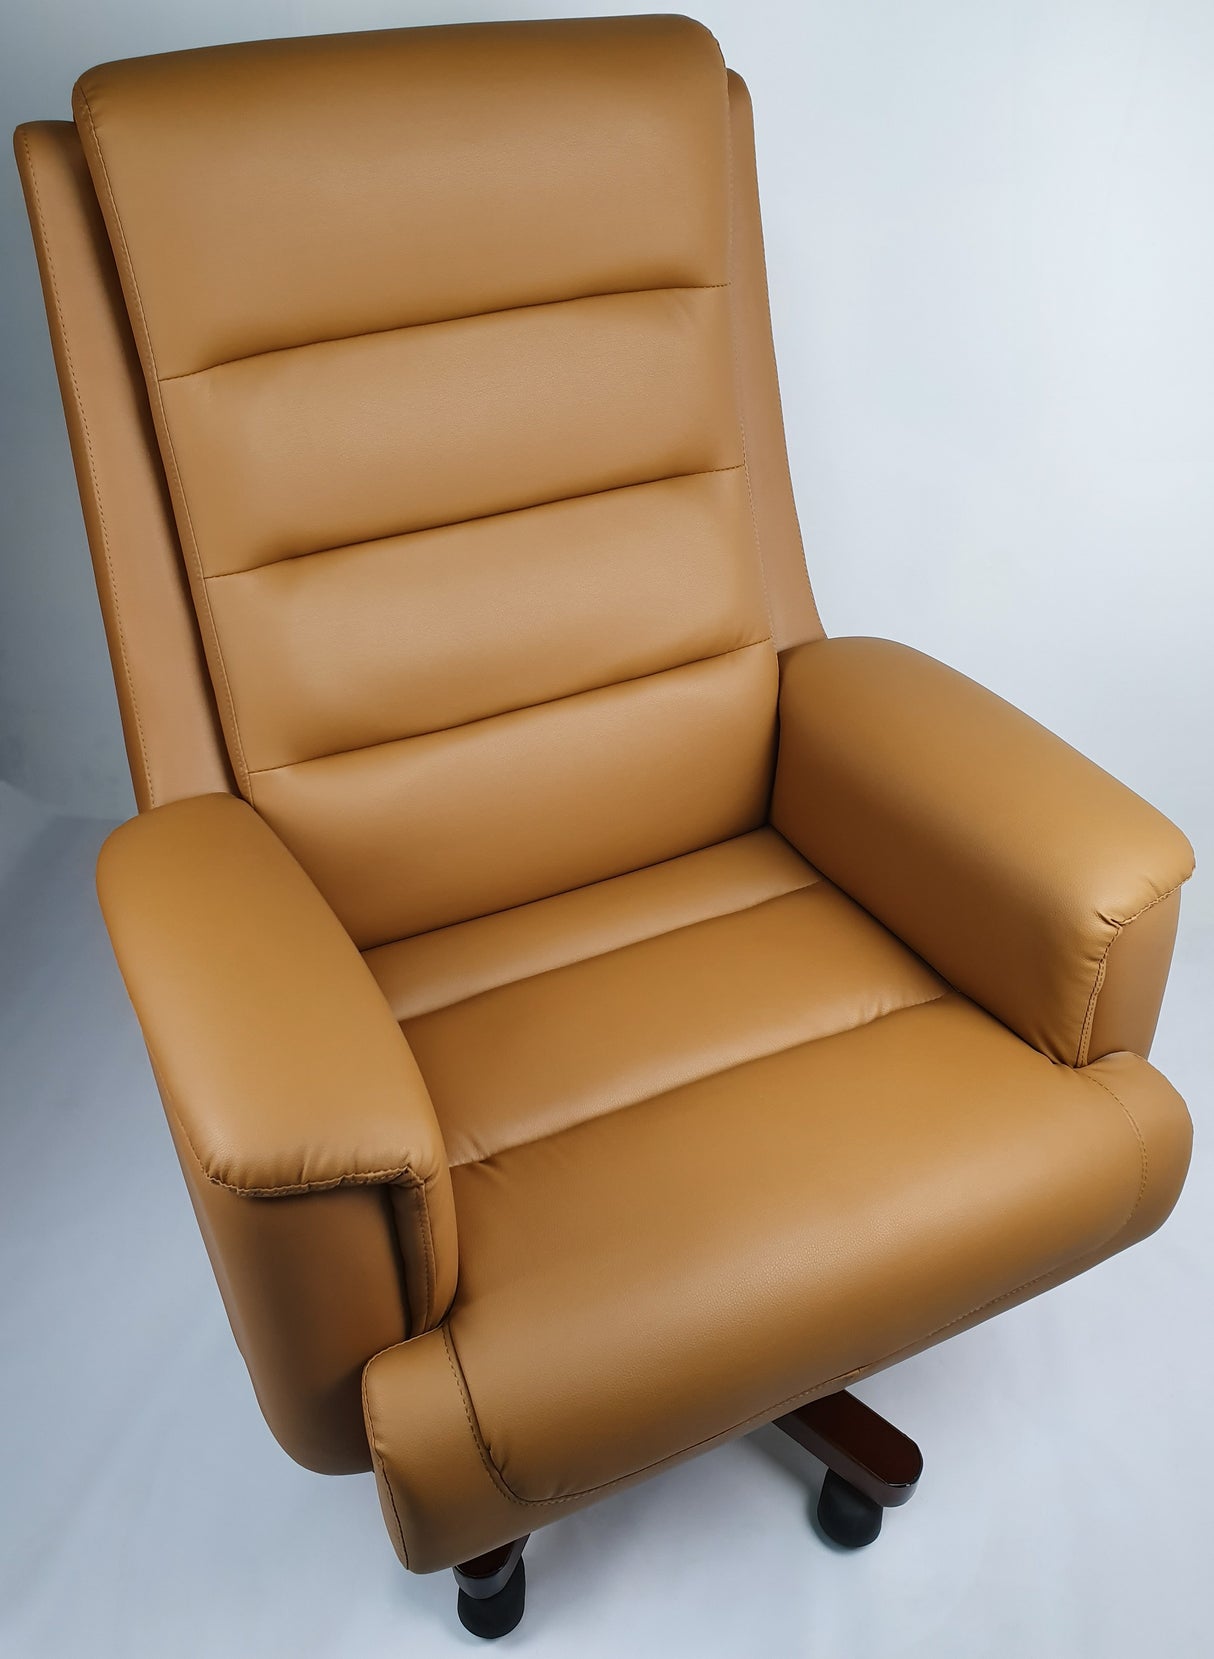 Beige Leather Executive Office Chair - 1840A